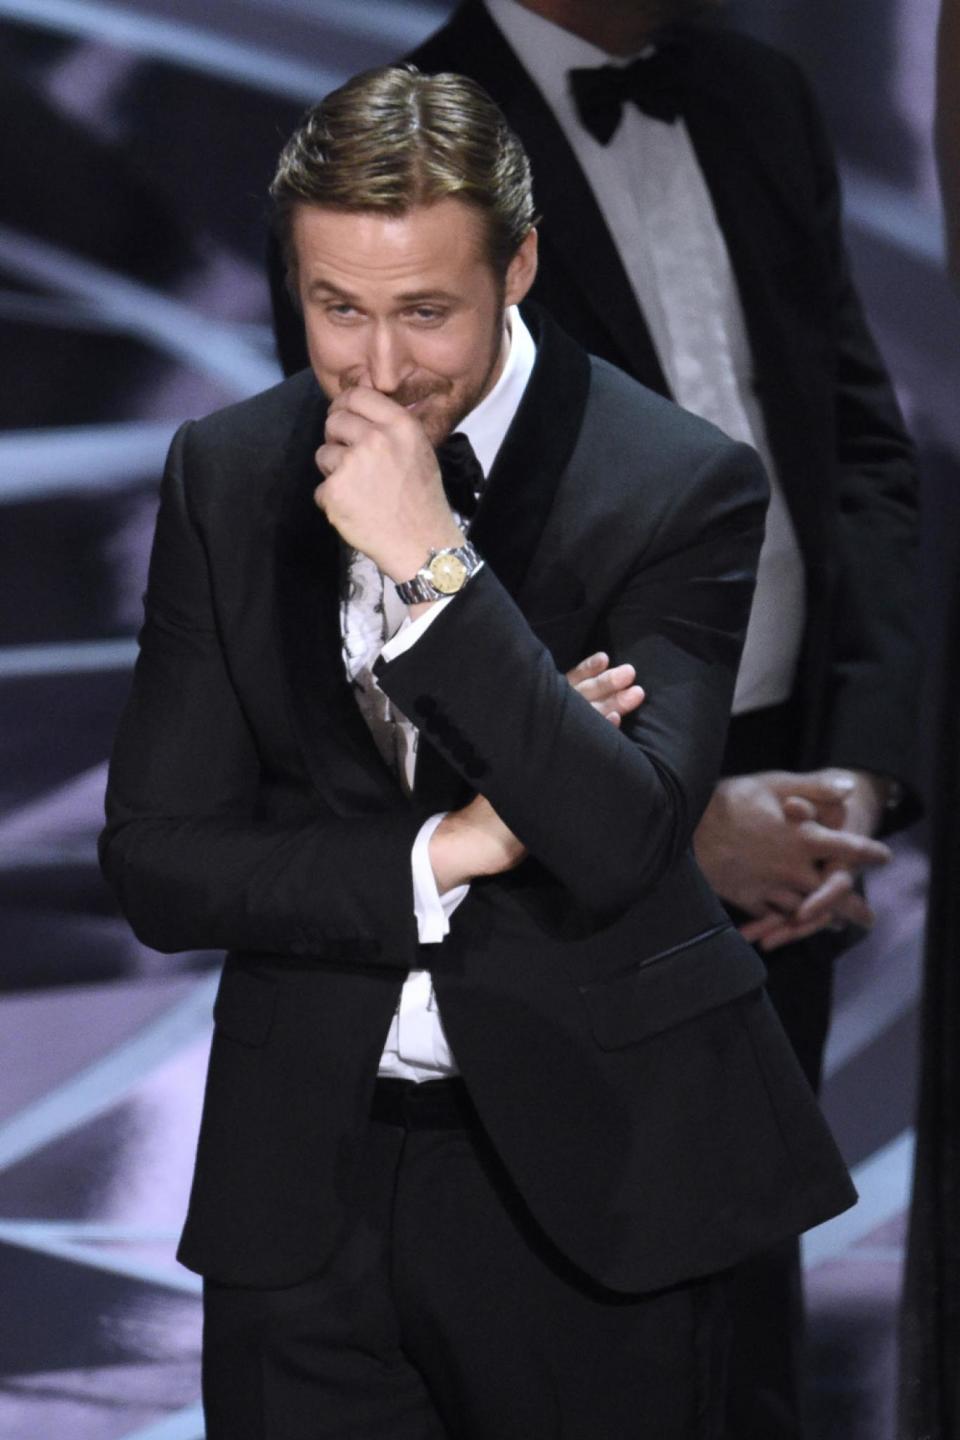 Blunder: Gosling on stage after the gaffe (Chris Pizzello/Invision/AP)